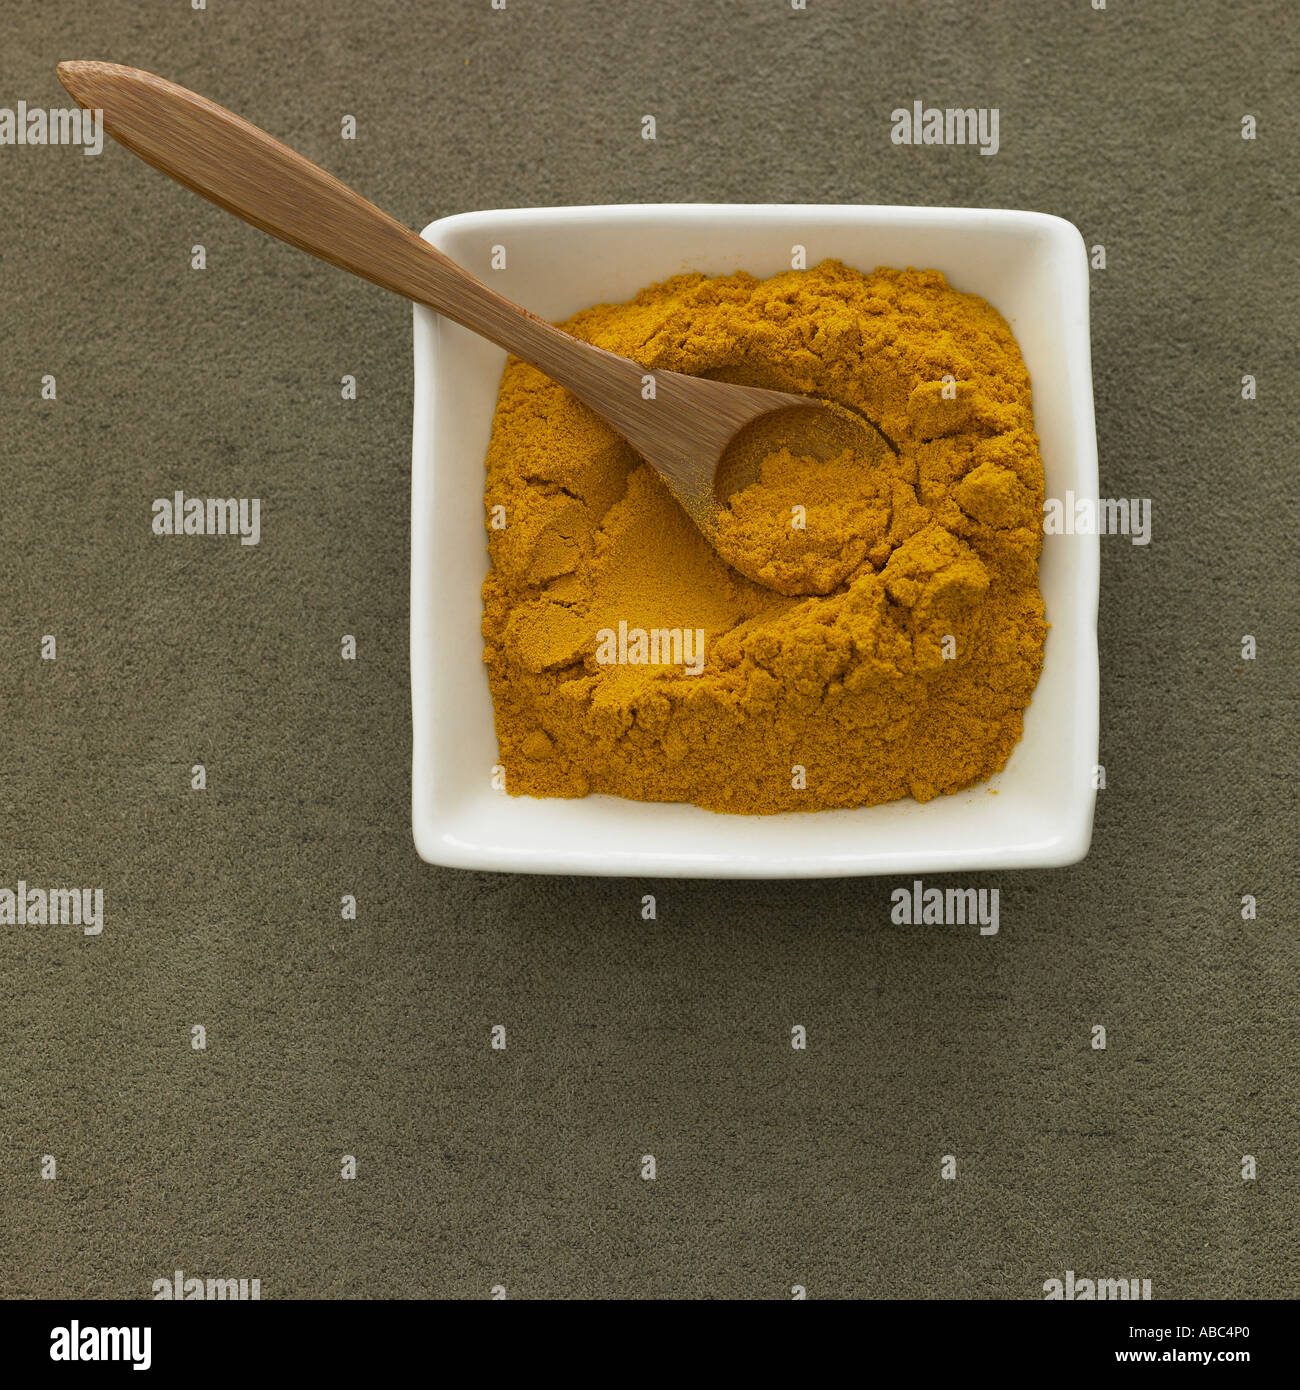 Turmeric powder - one of a series of spice images Stock Photo